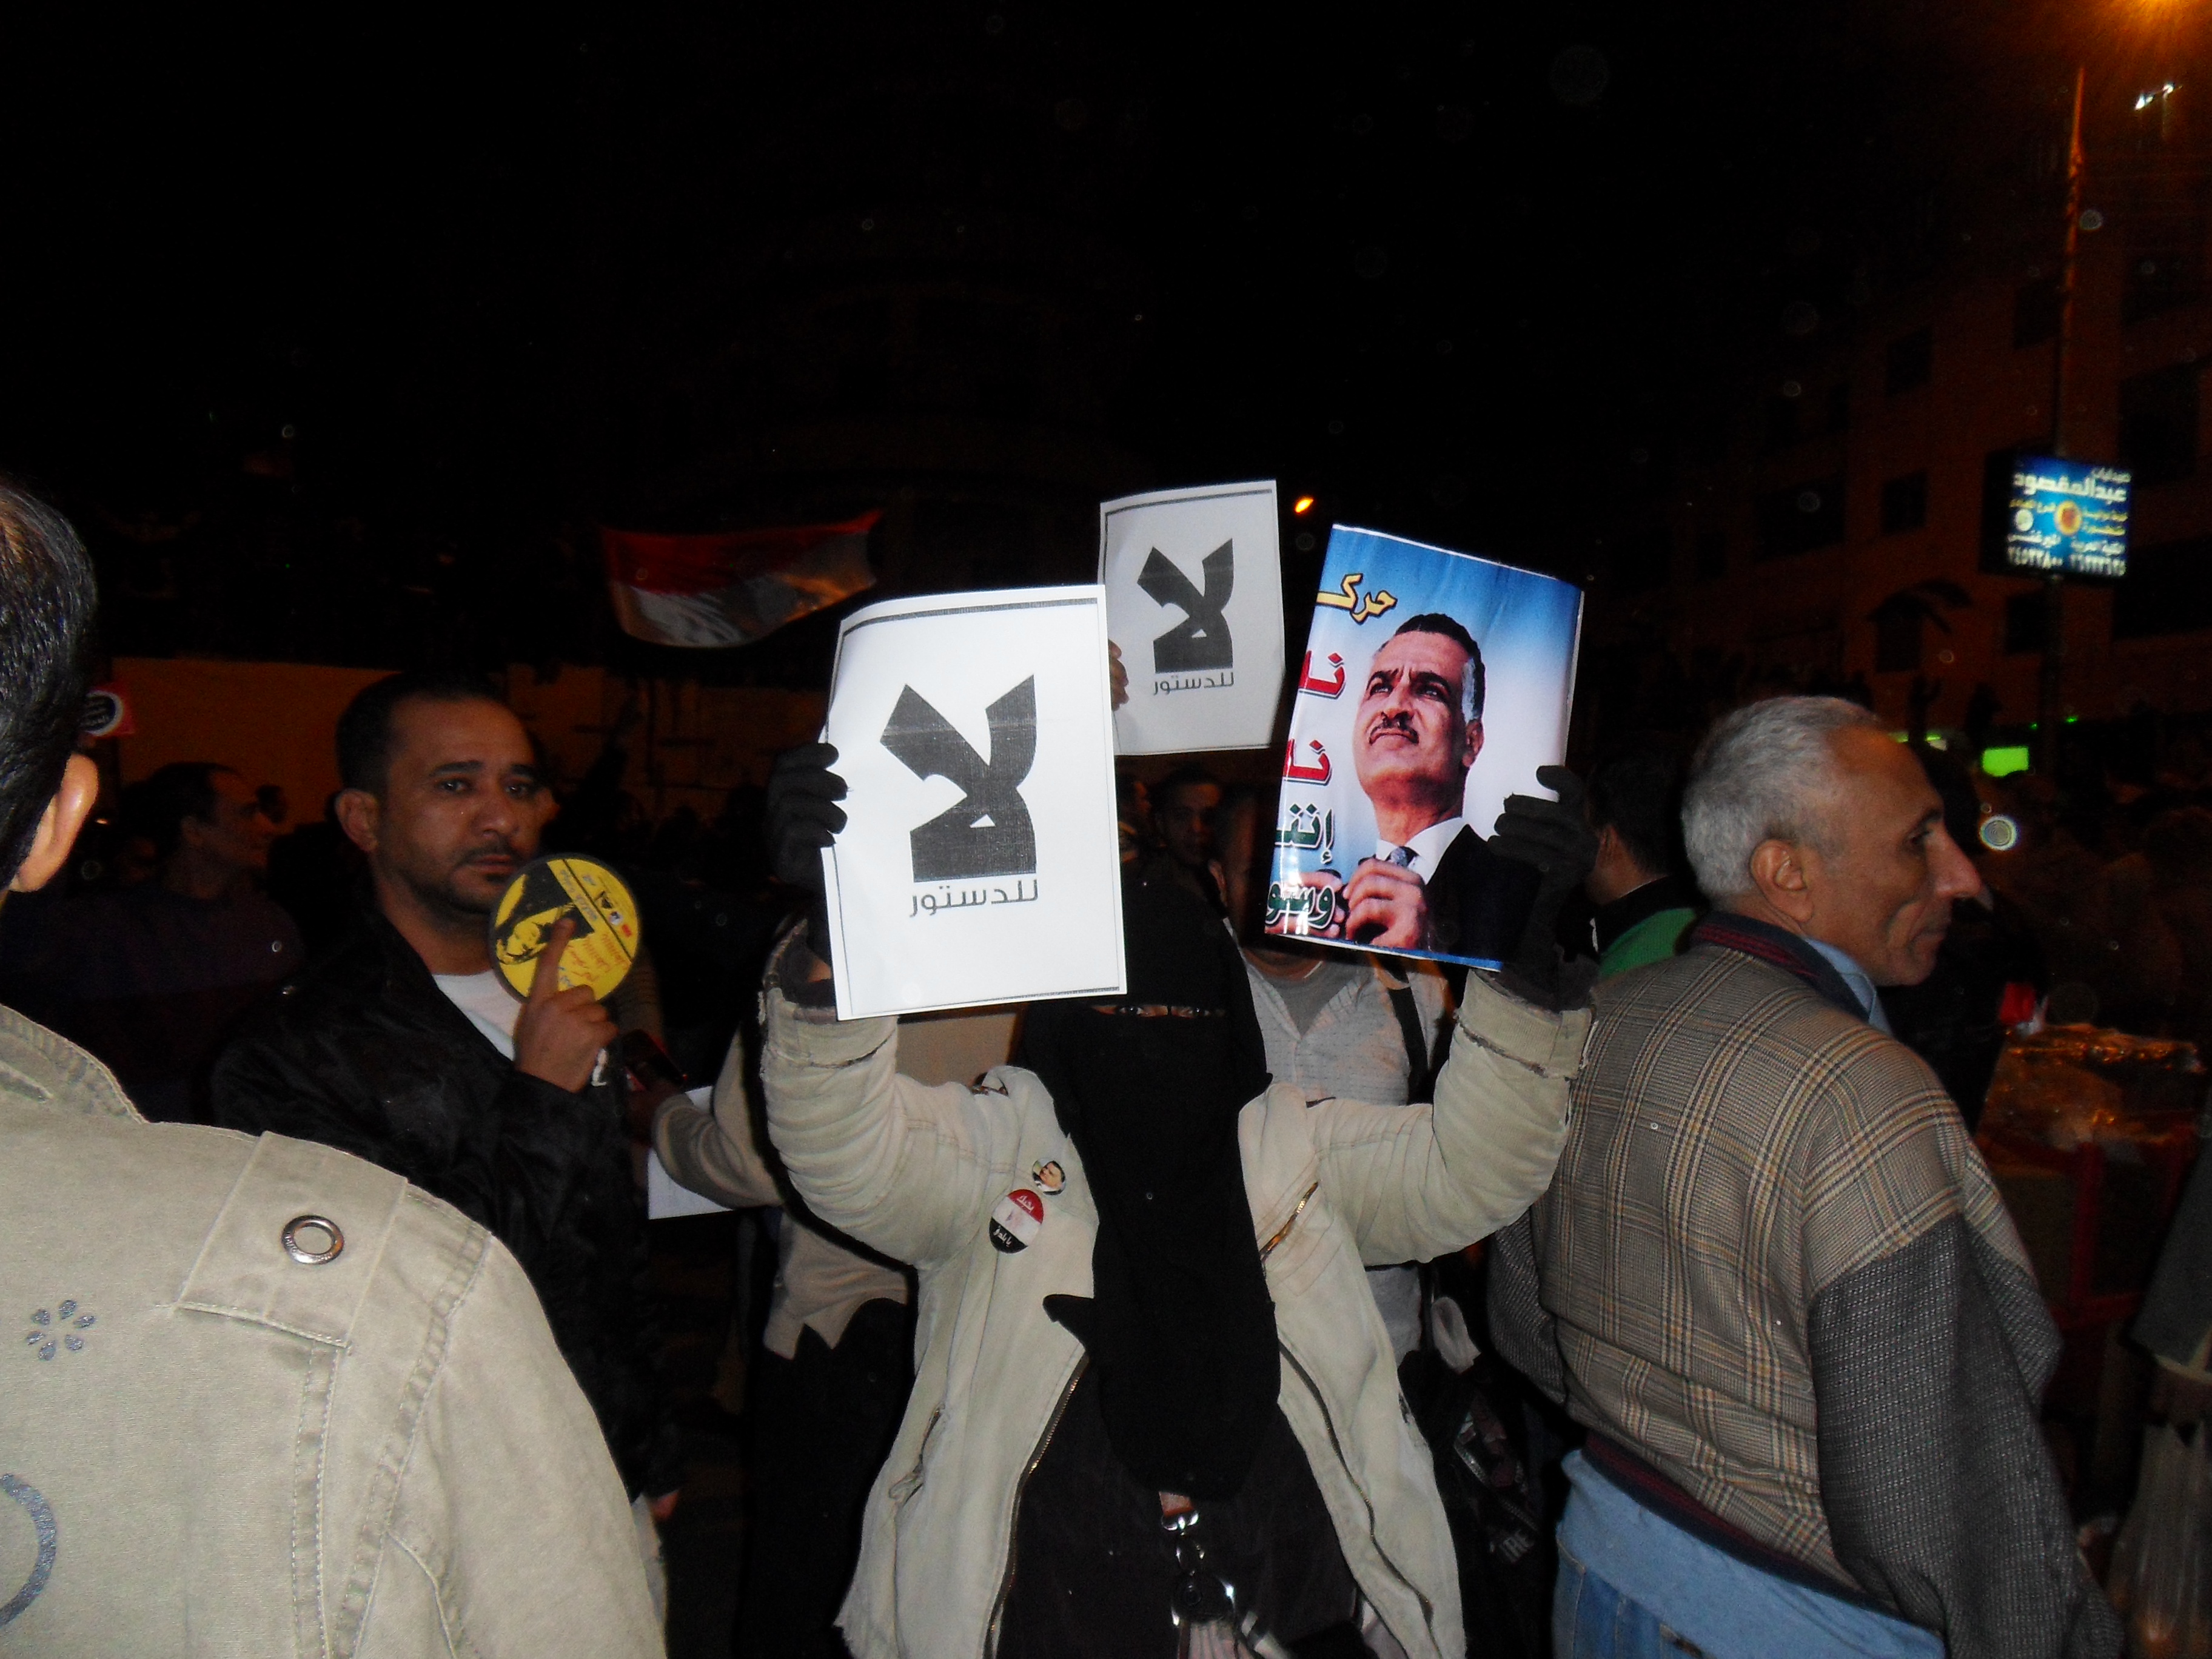 Surprising: A woman wearing the niqab protesting against Morsi. The sign simply reads "No."